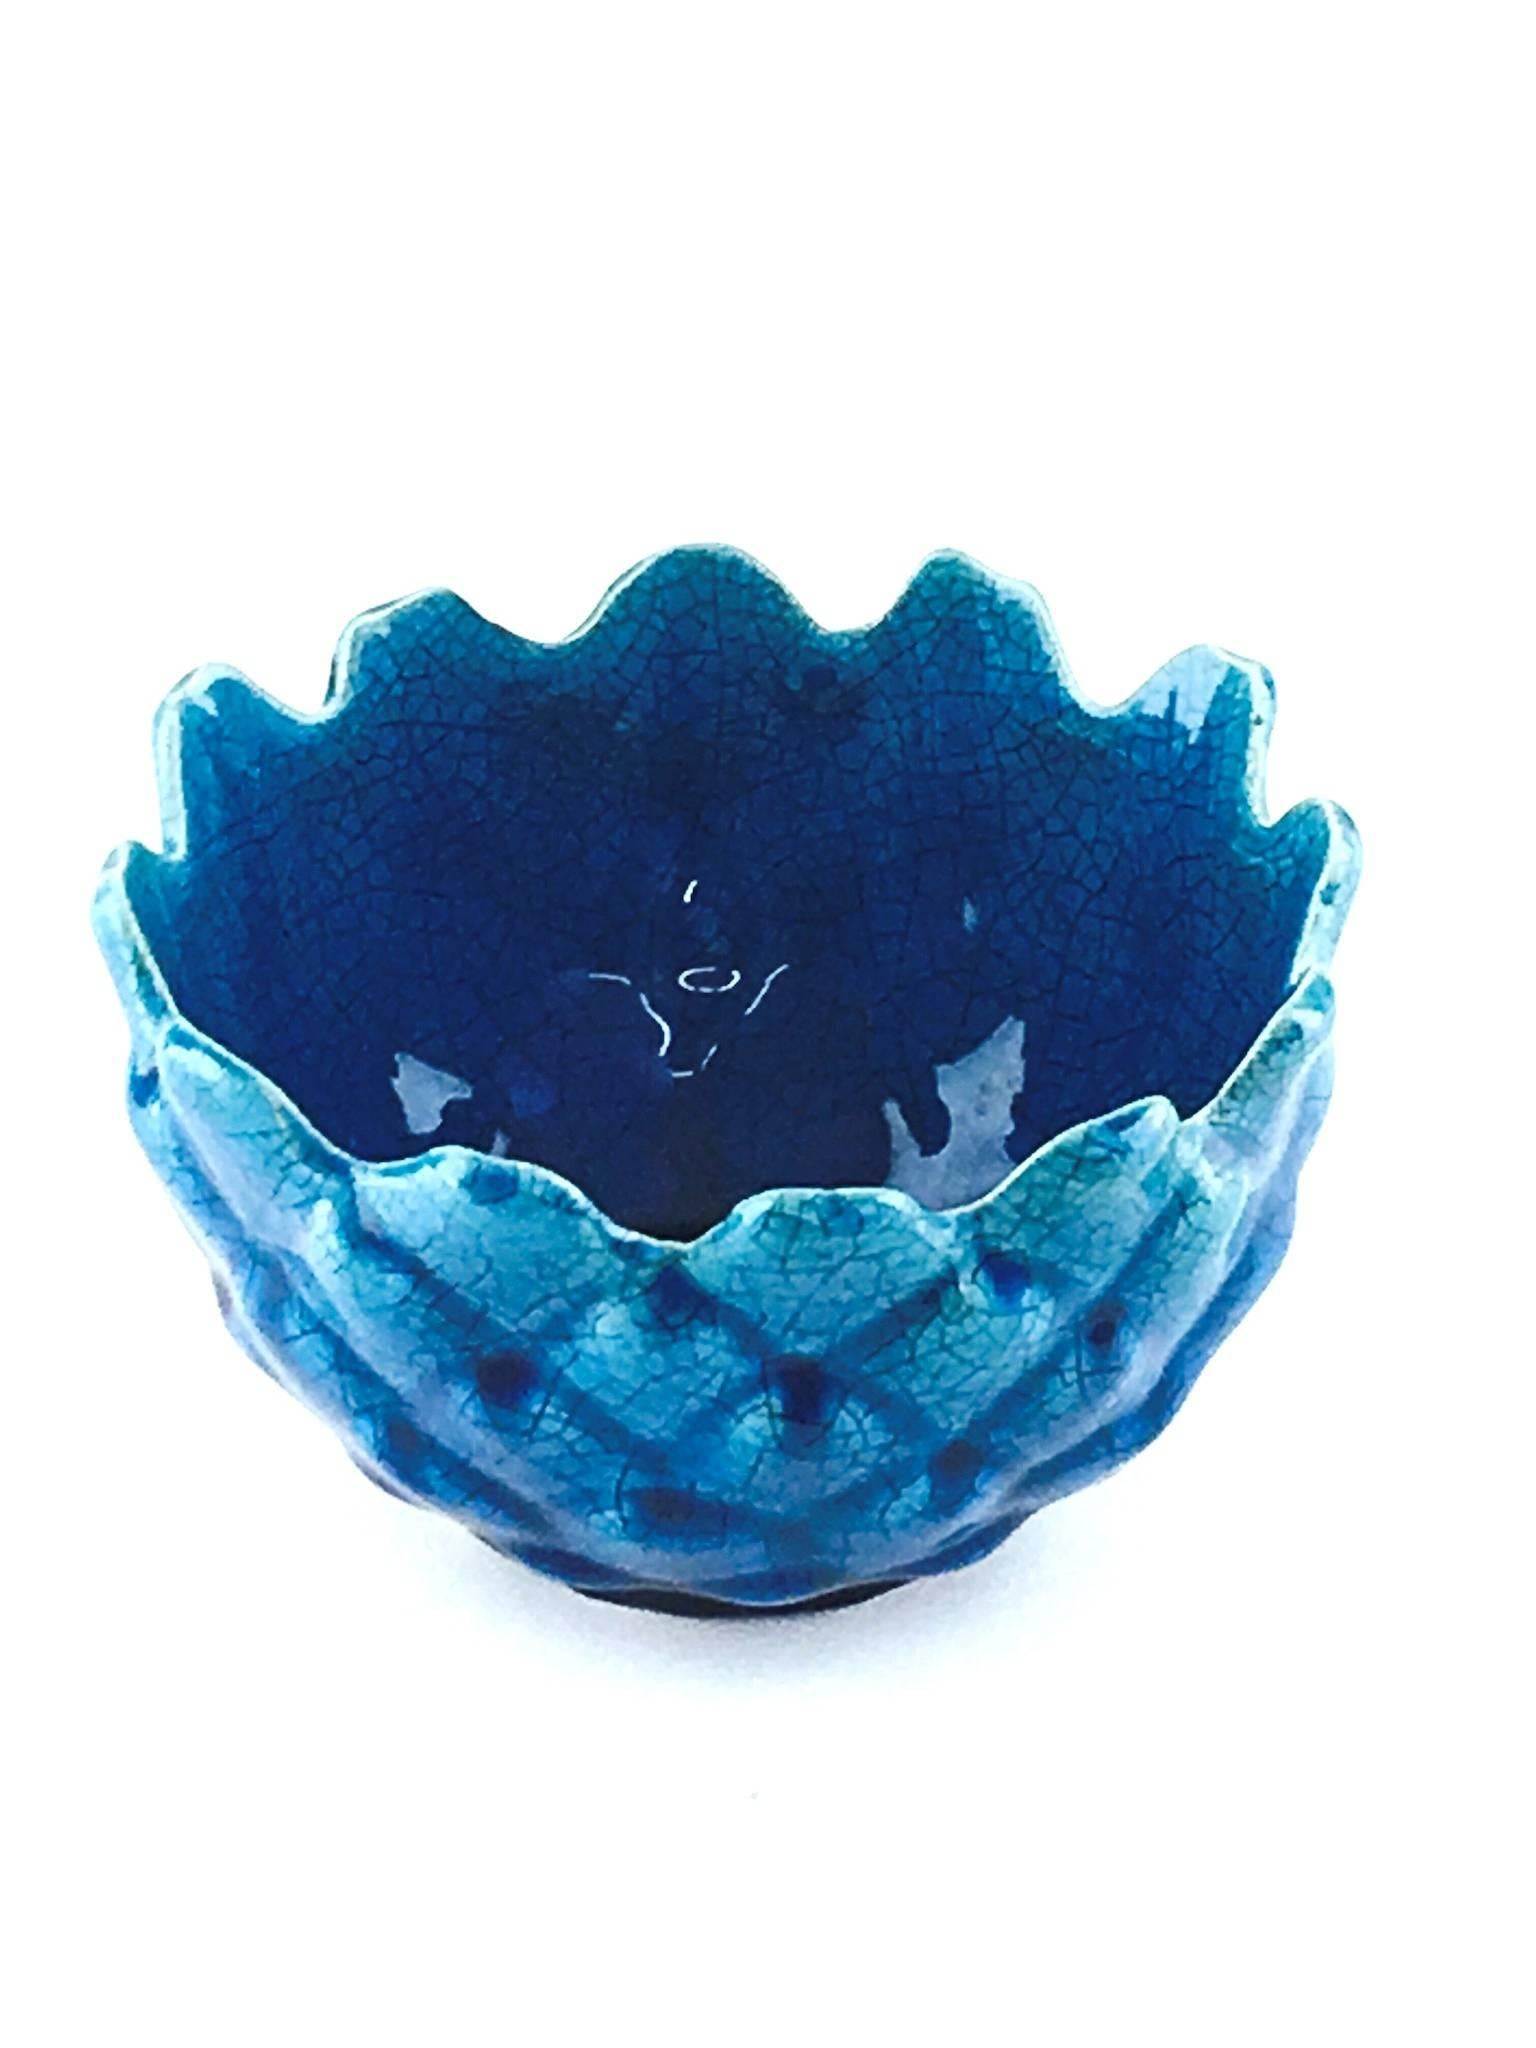 1960 fantastic colored ceramic bowl in the style of Steven Heinemann.
The color is the same when you have the item in front of you; it is not an picture effect.
 